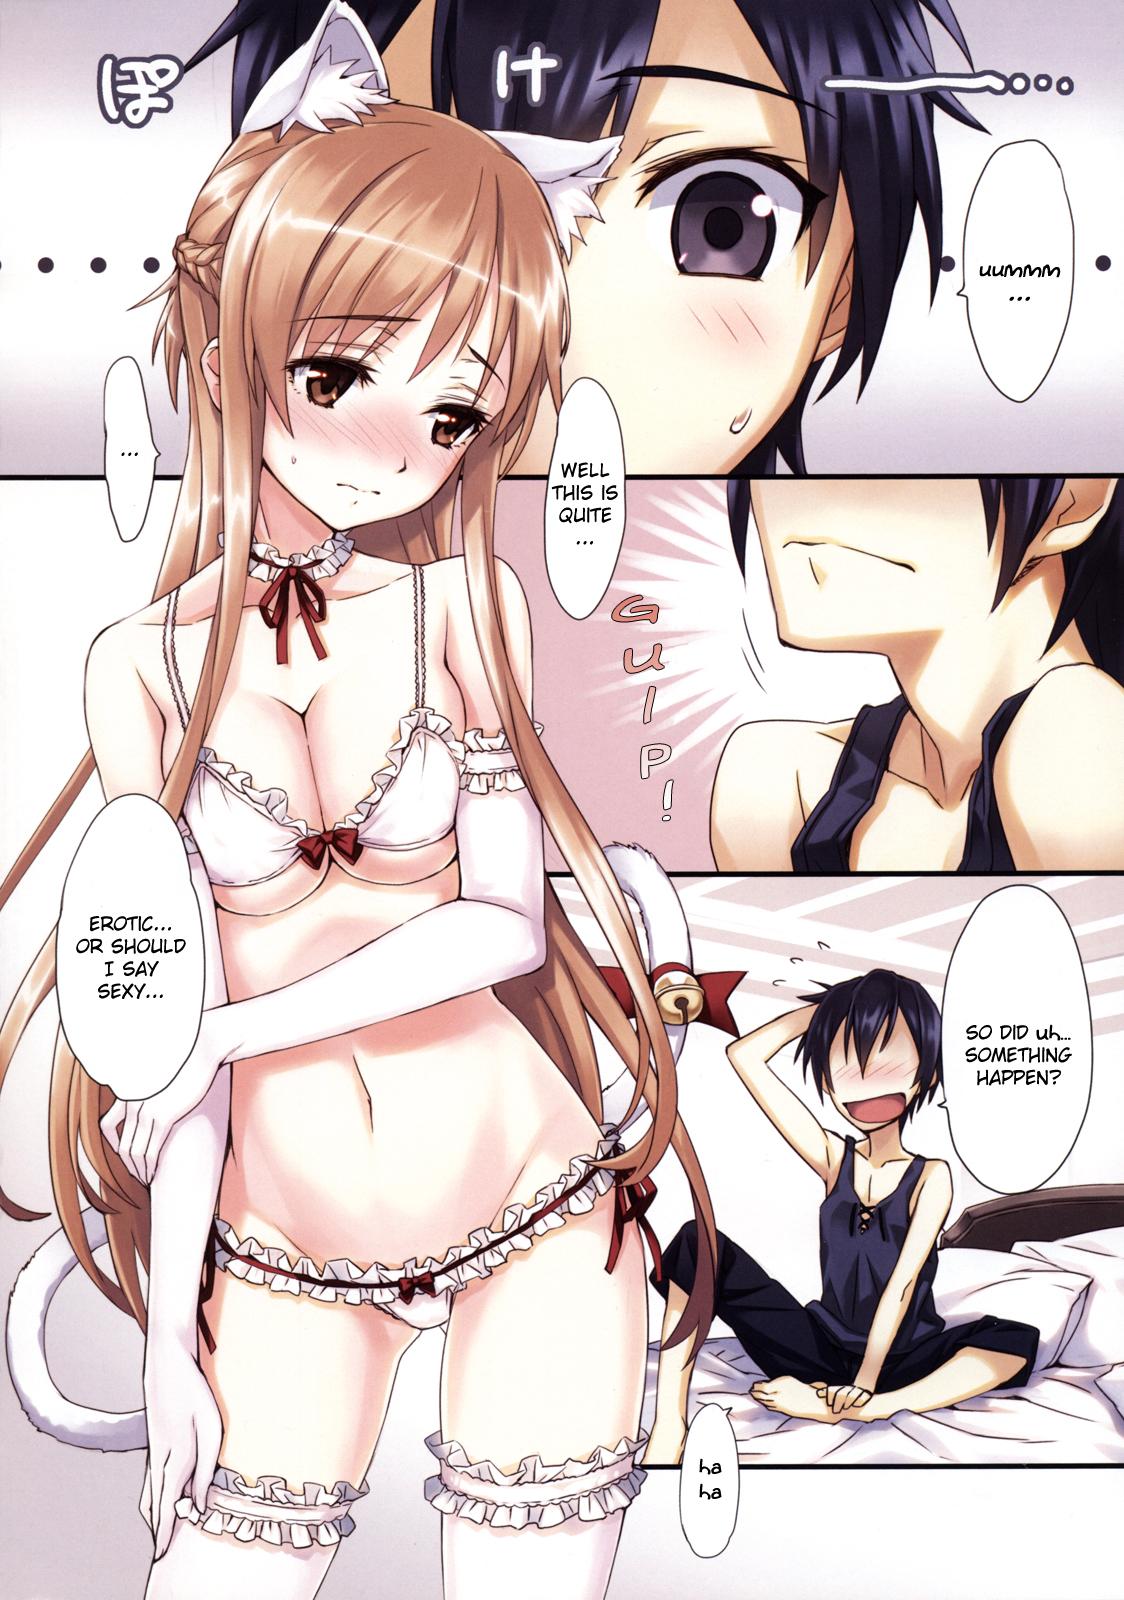 Submission Sword Art Extra - Sword art online Orgasms - Page 6